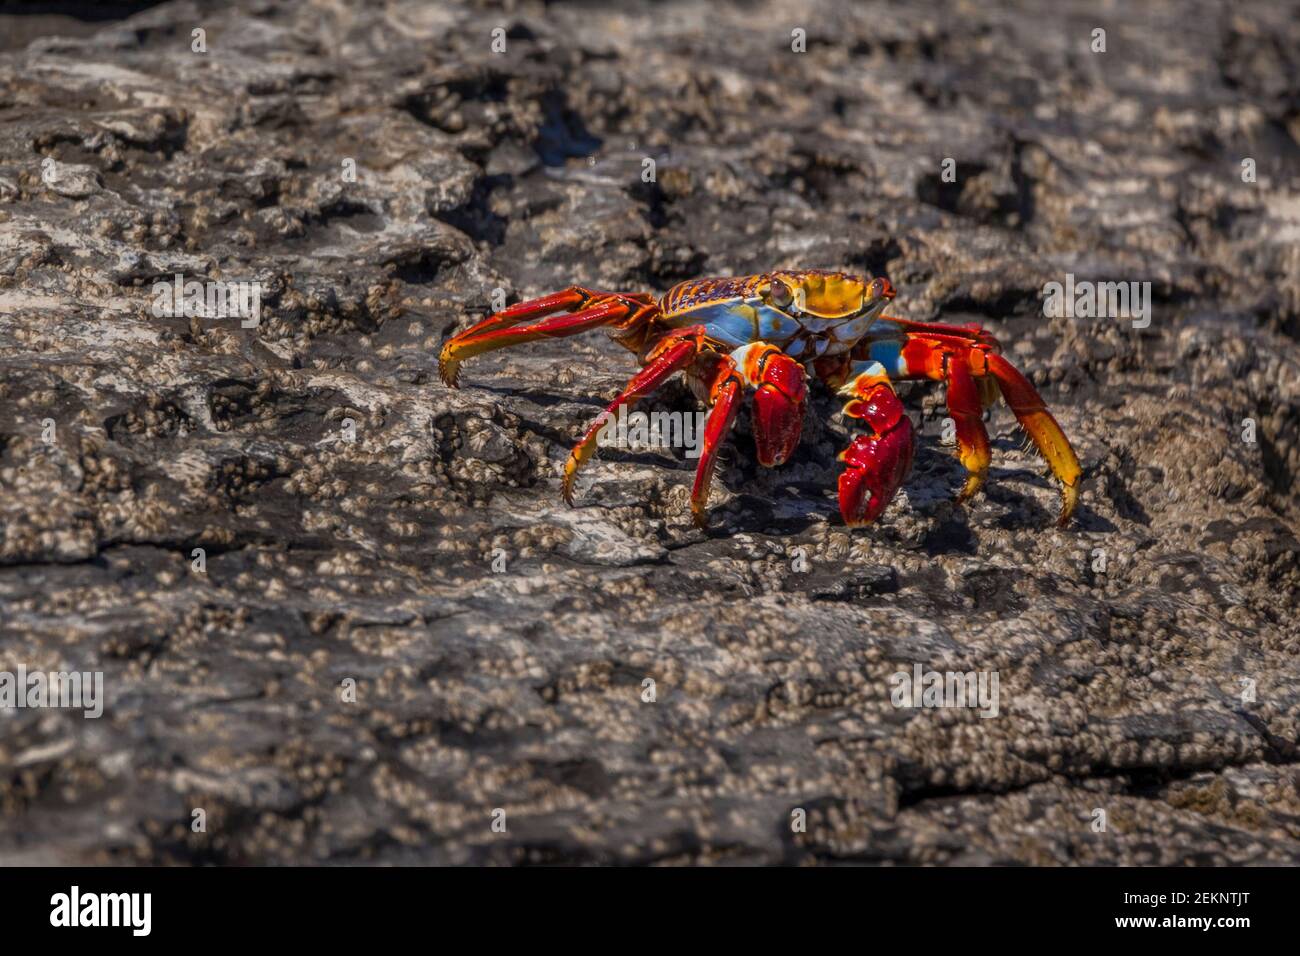 Colorful Red Rock Crab (Grapsus grapsus) with beautiful contrast of red, blue, orange and yellow colors in the Pacific Coast of Baja California Sur Stock Photo